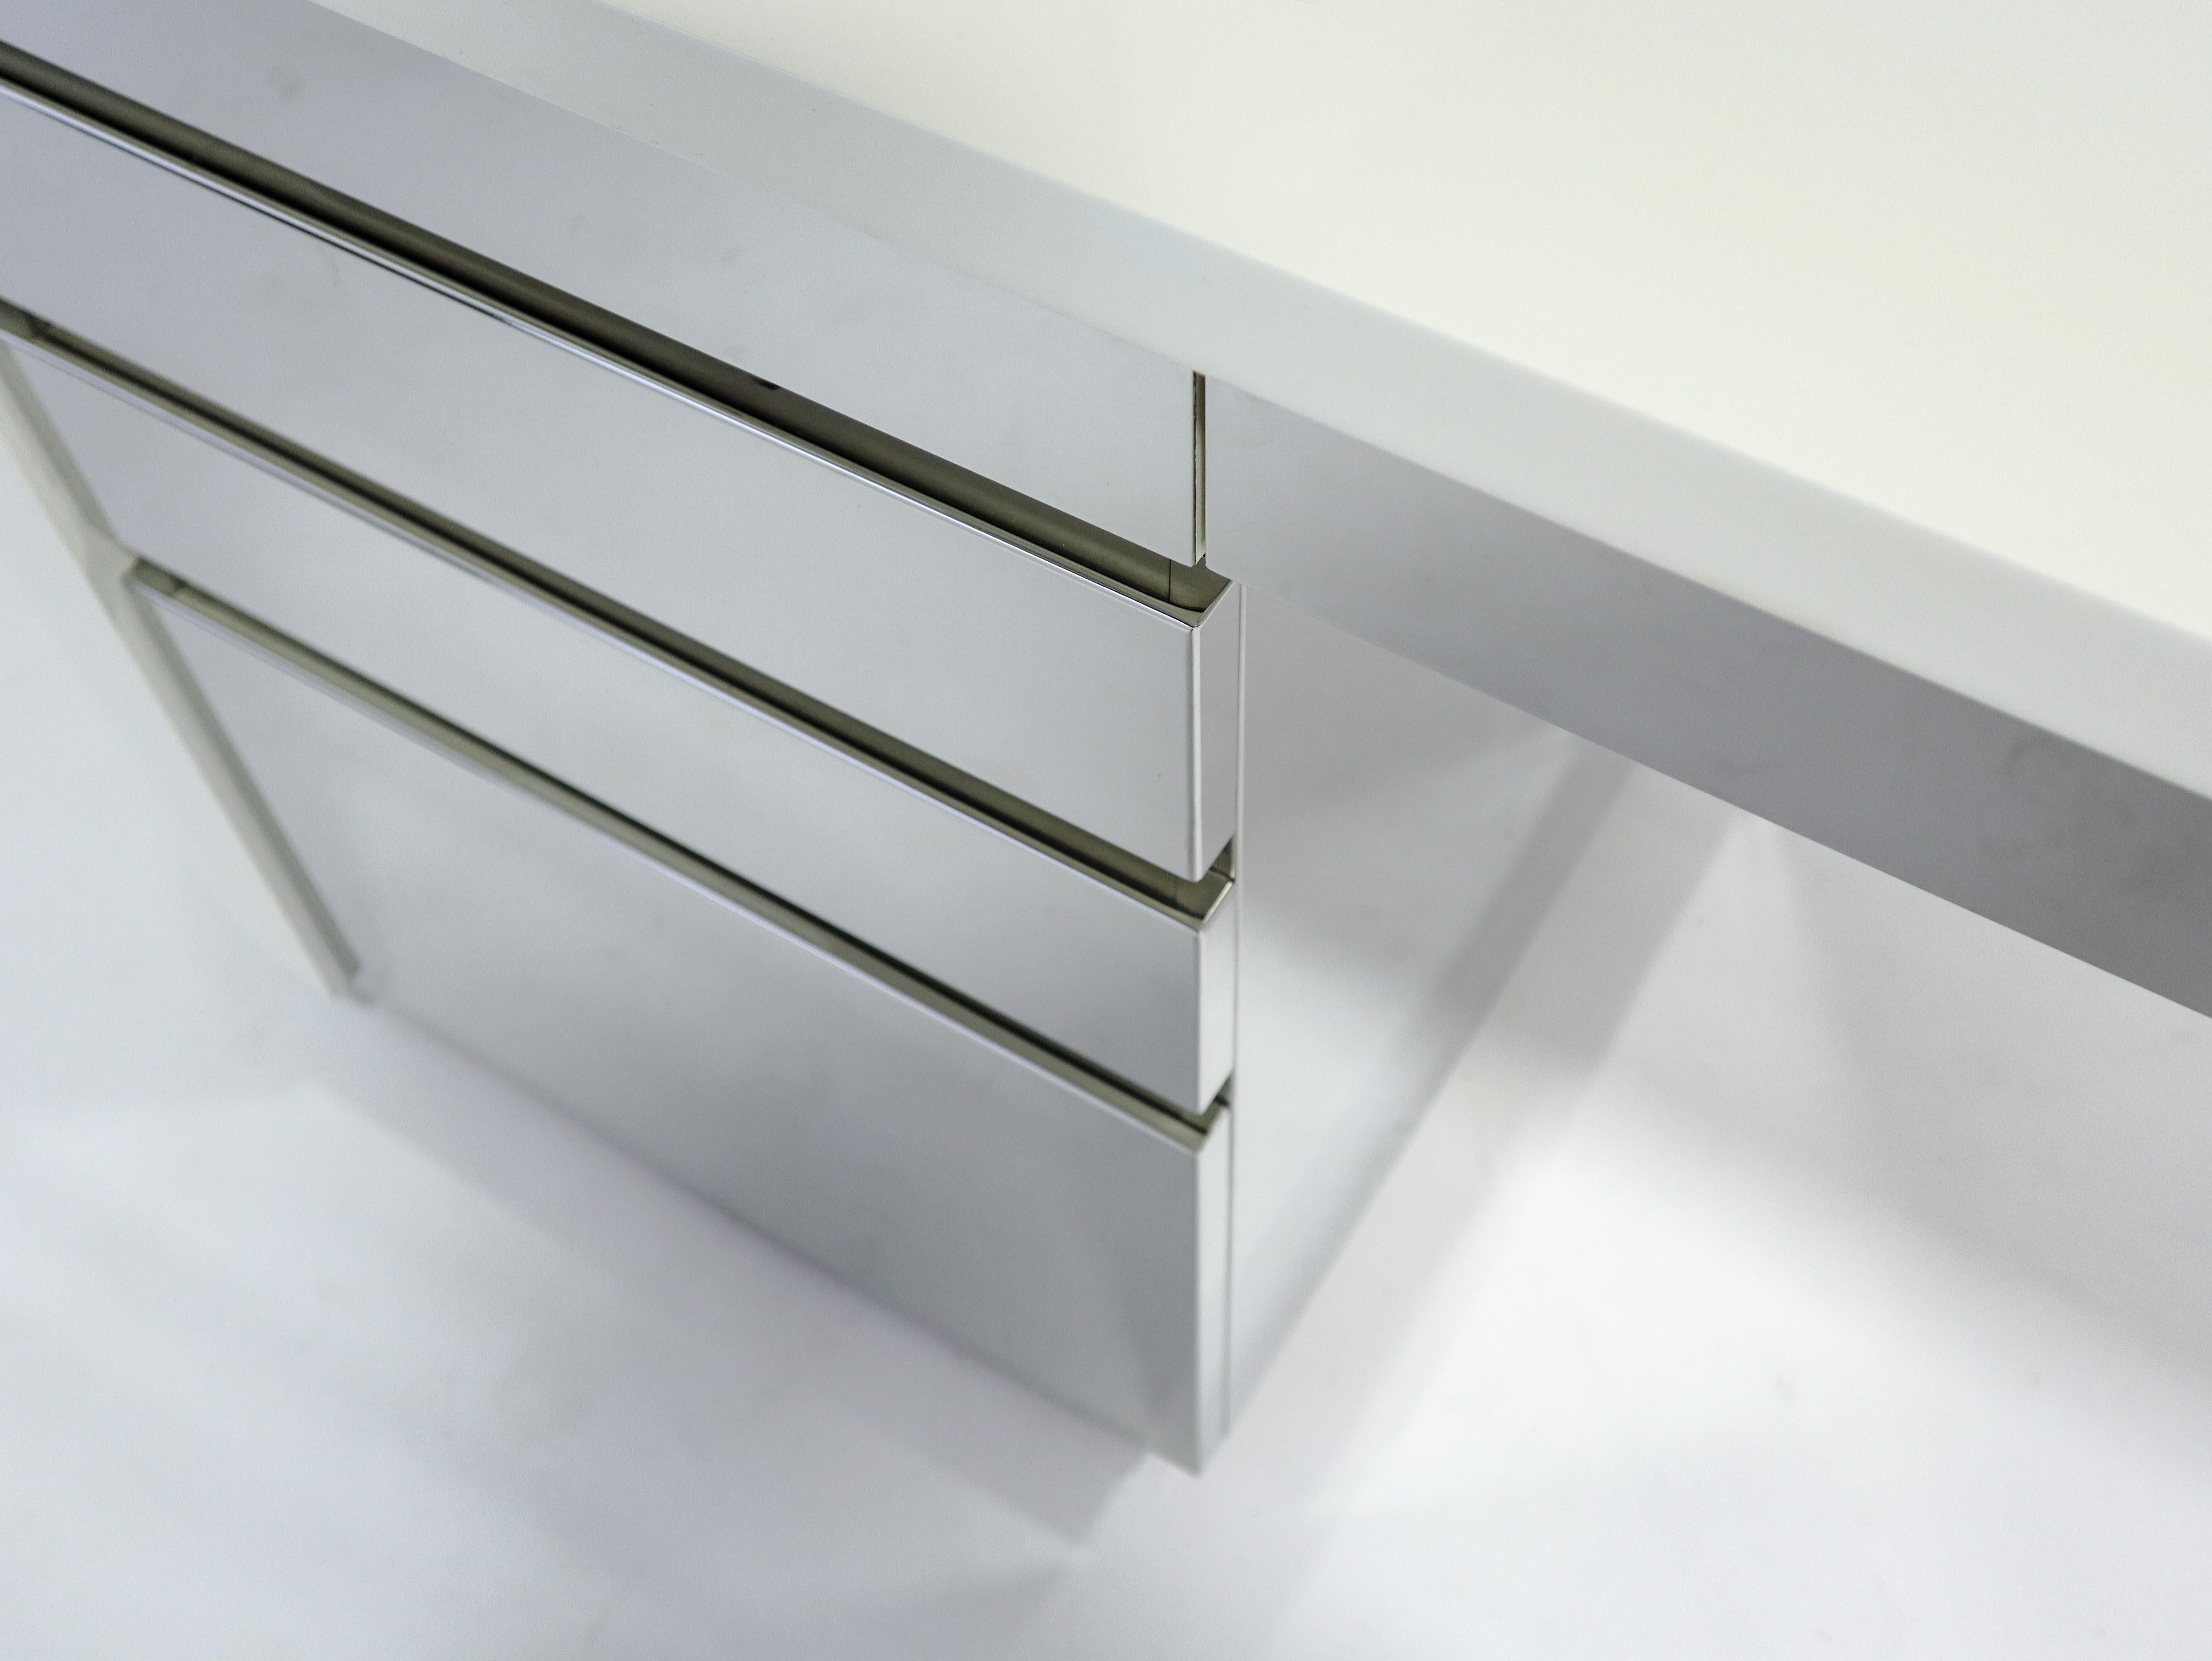 American Cantilever Desk by Ron Seff, Lacquer and Stainless Steel